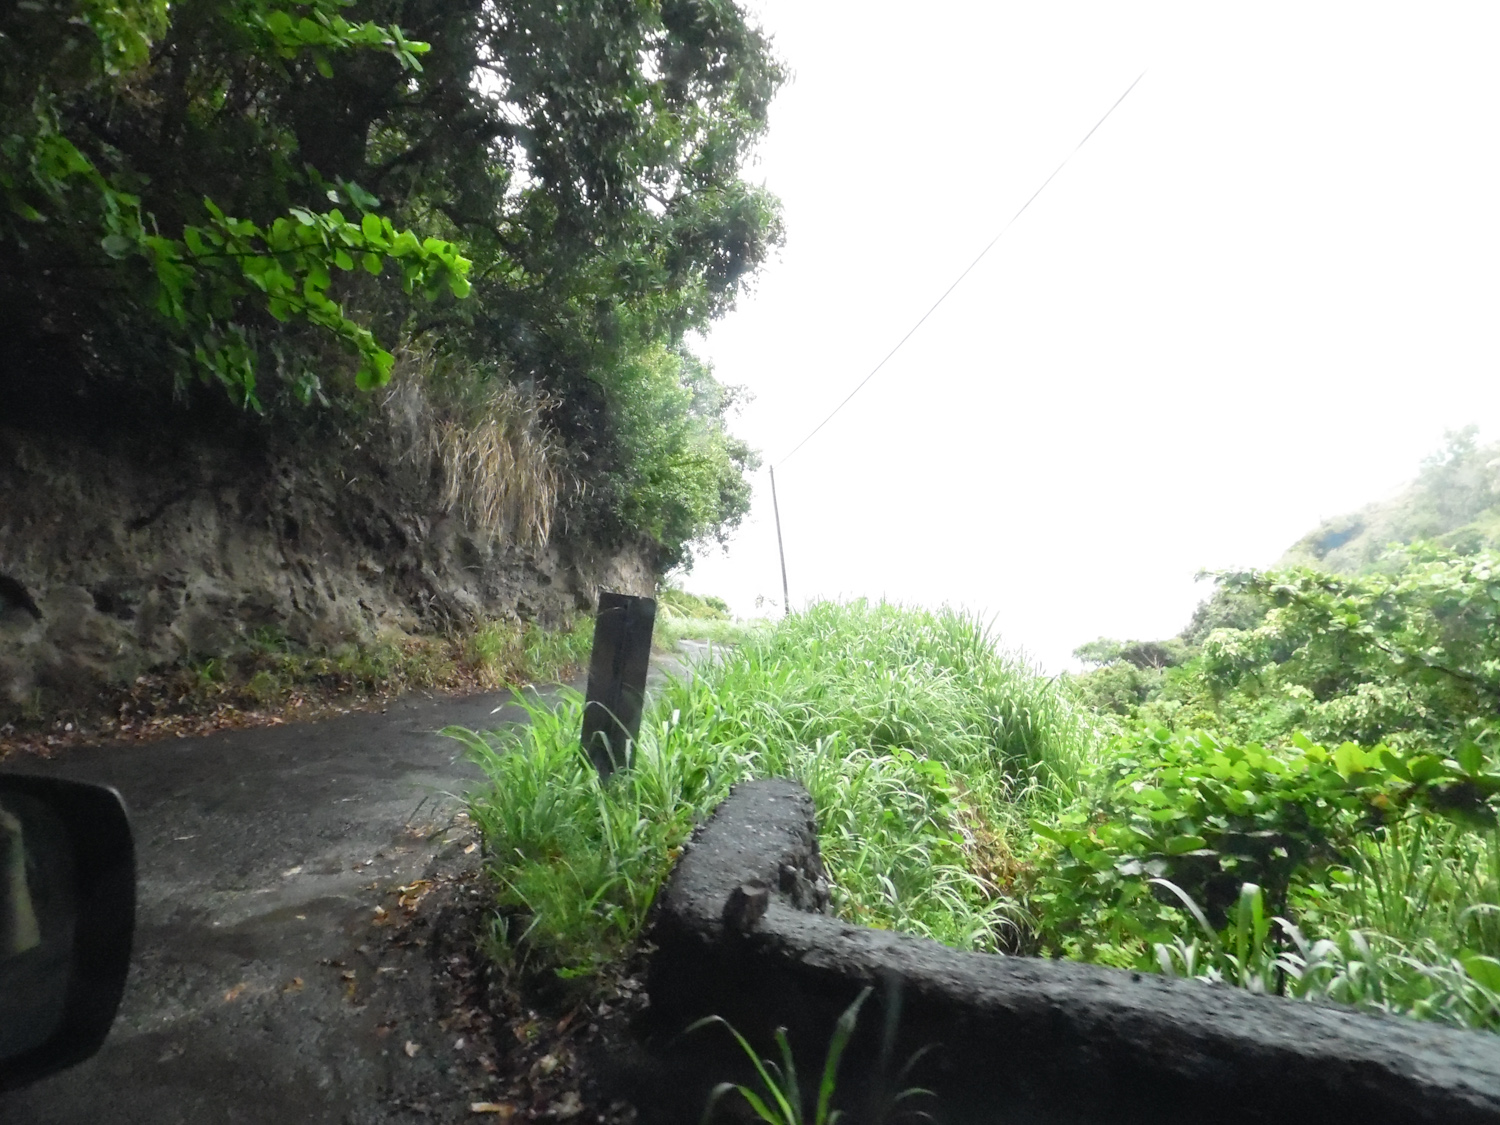 The road (typical) to Hana